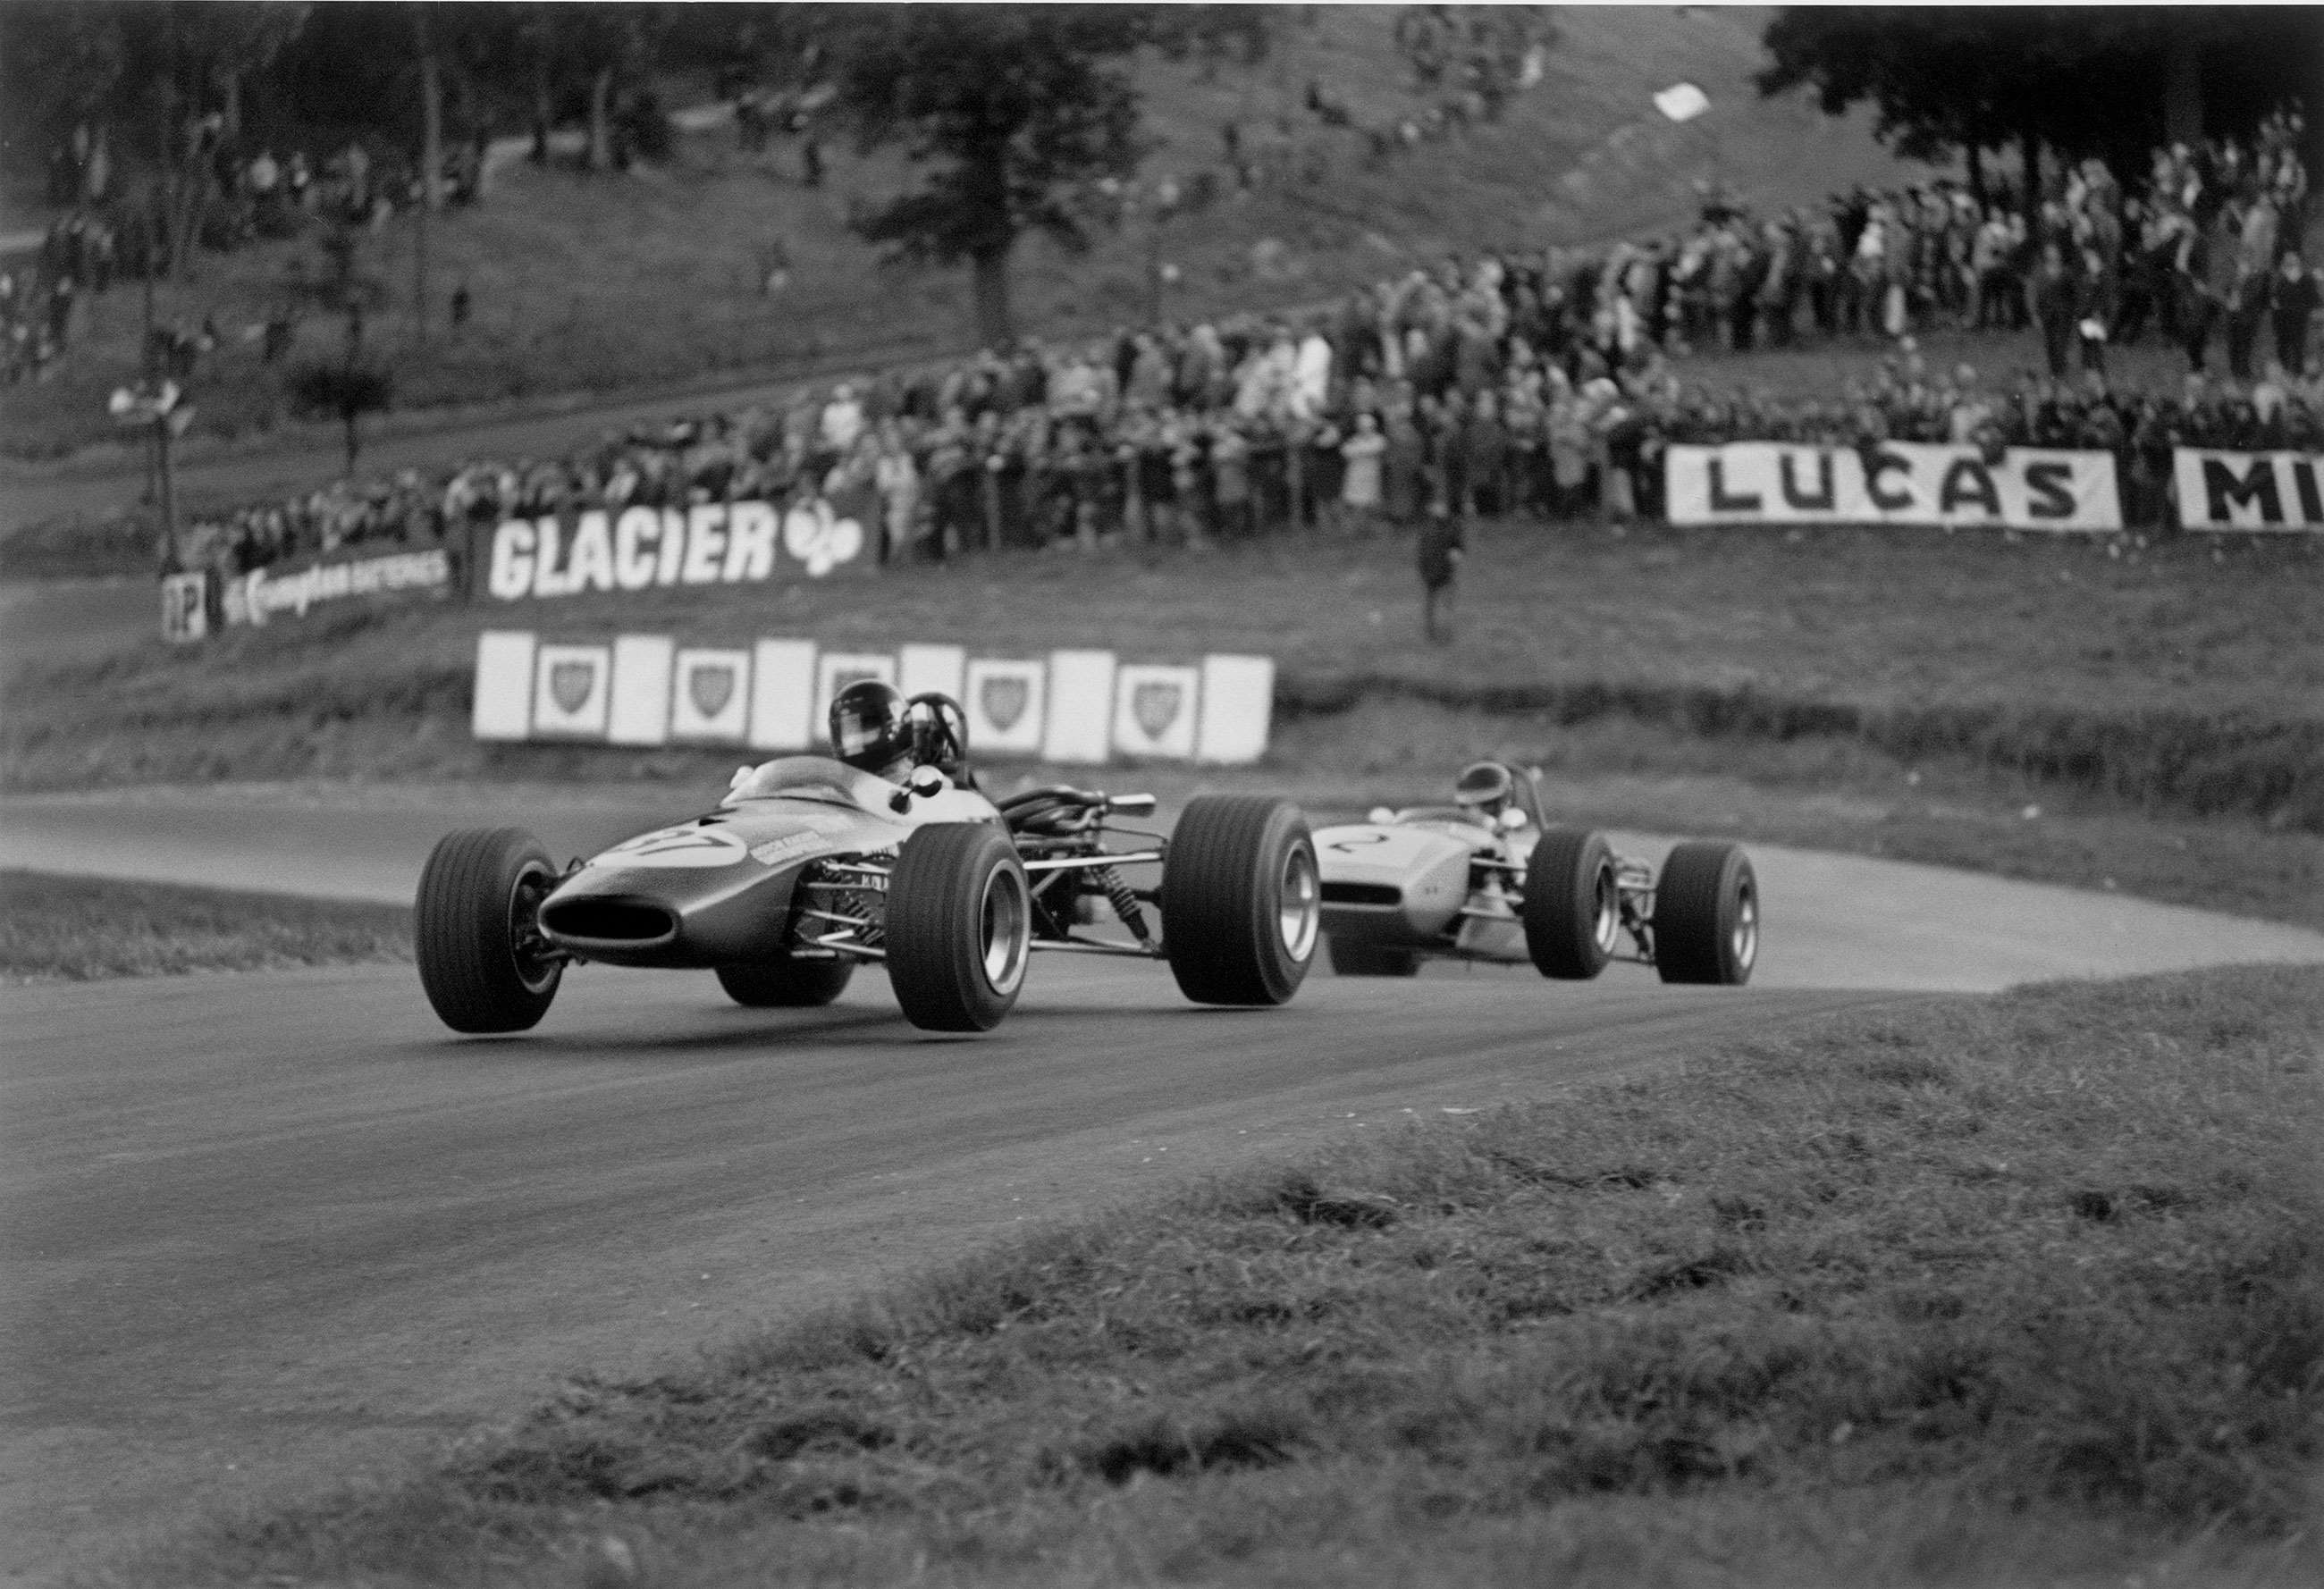 The 1969 Lincolnshire International Trophy F3 race, with James Hunt 
in his Brabham BT21B ahead of Ronnie Peterson in his March 693.